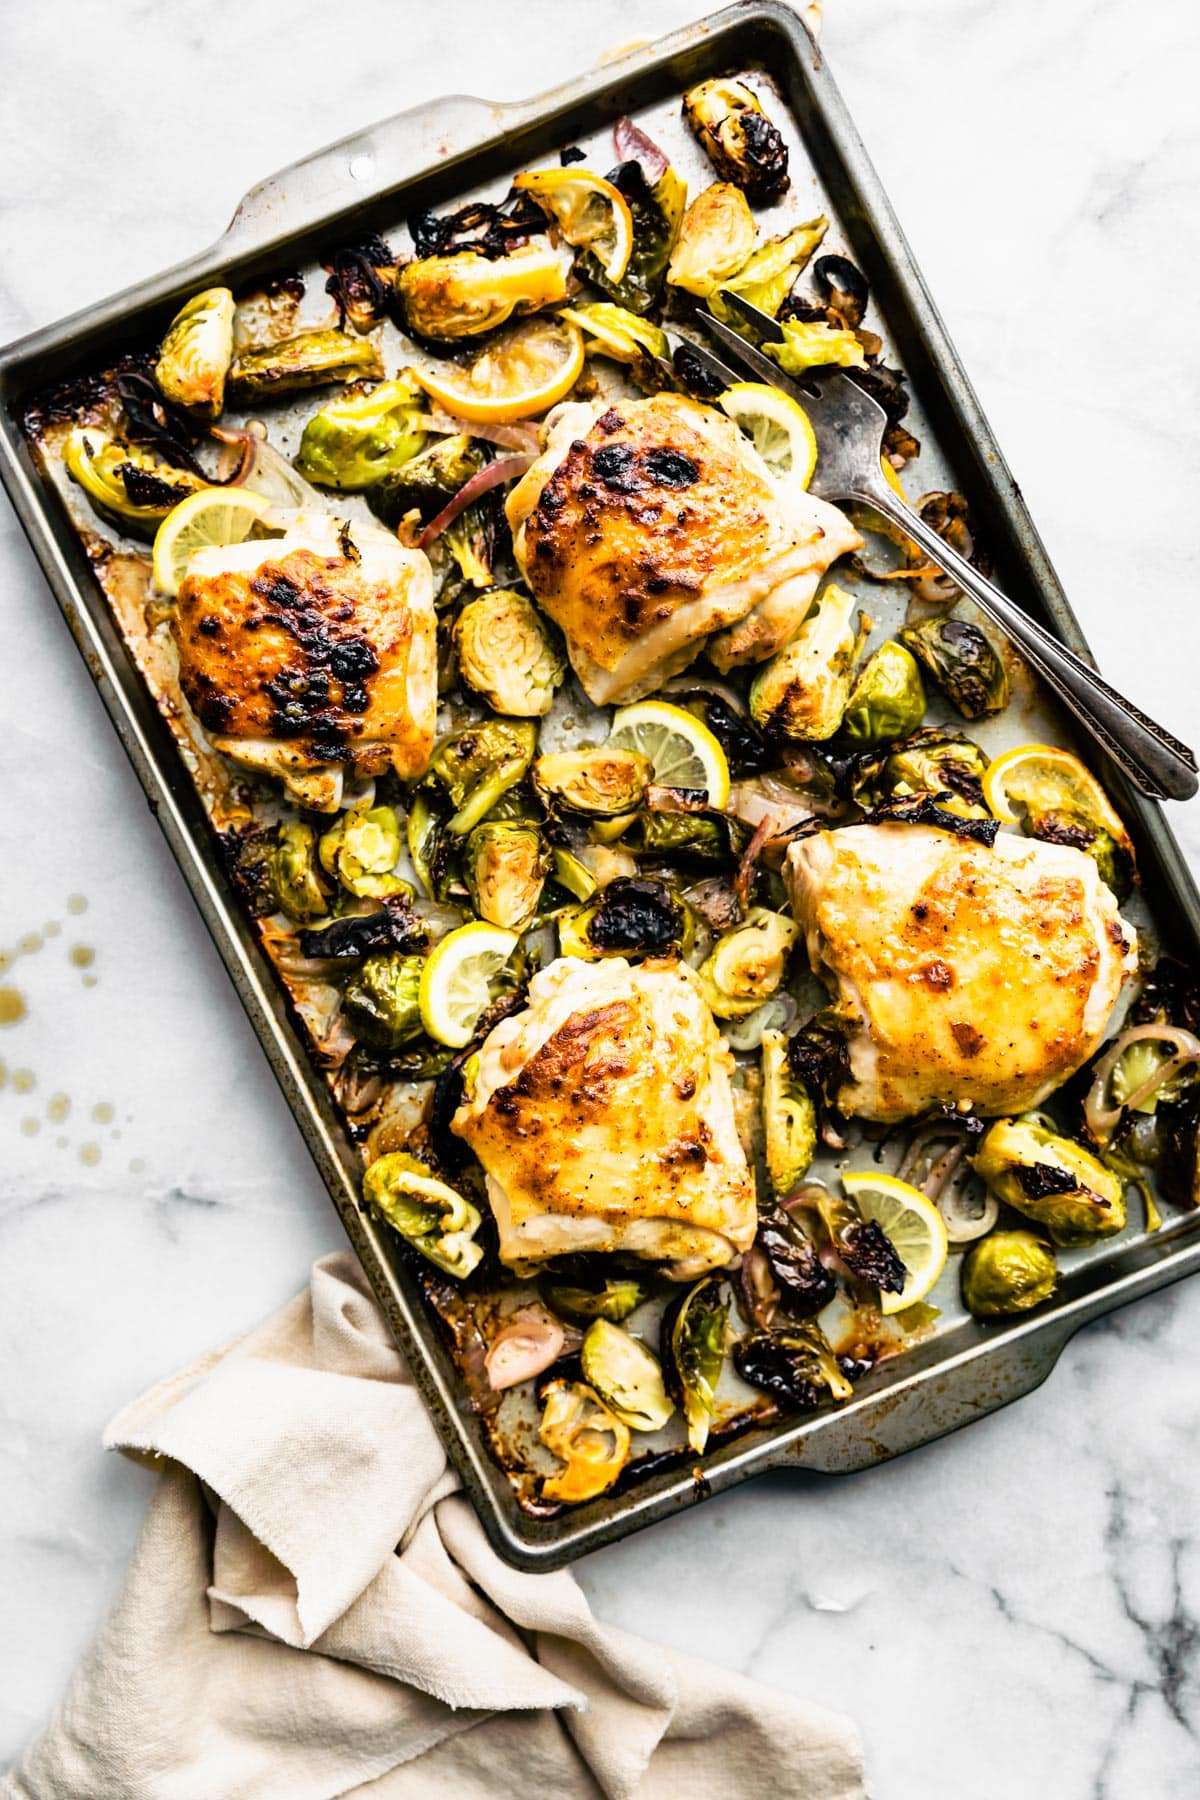 Cooked Honey Mustard Chicken Thighs with Brussels Sprouts on a baking sheet and ready to be served